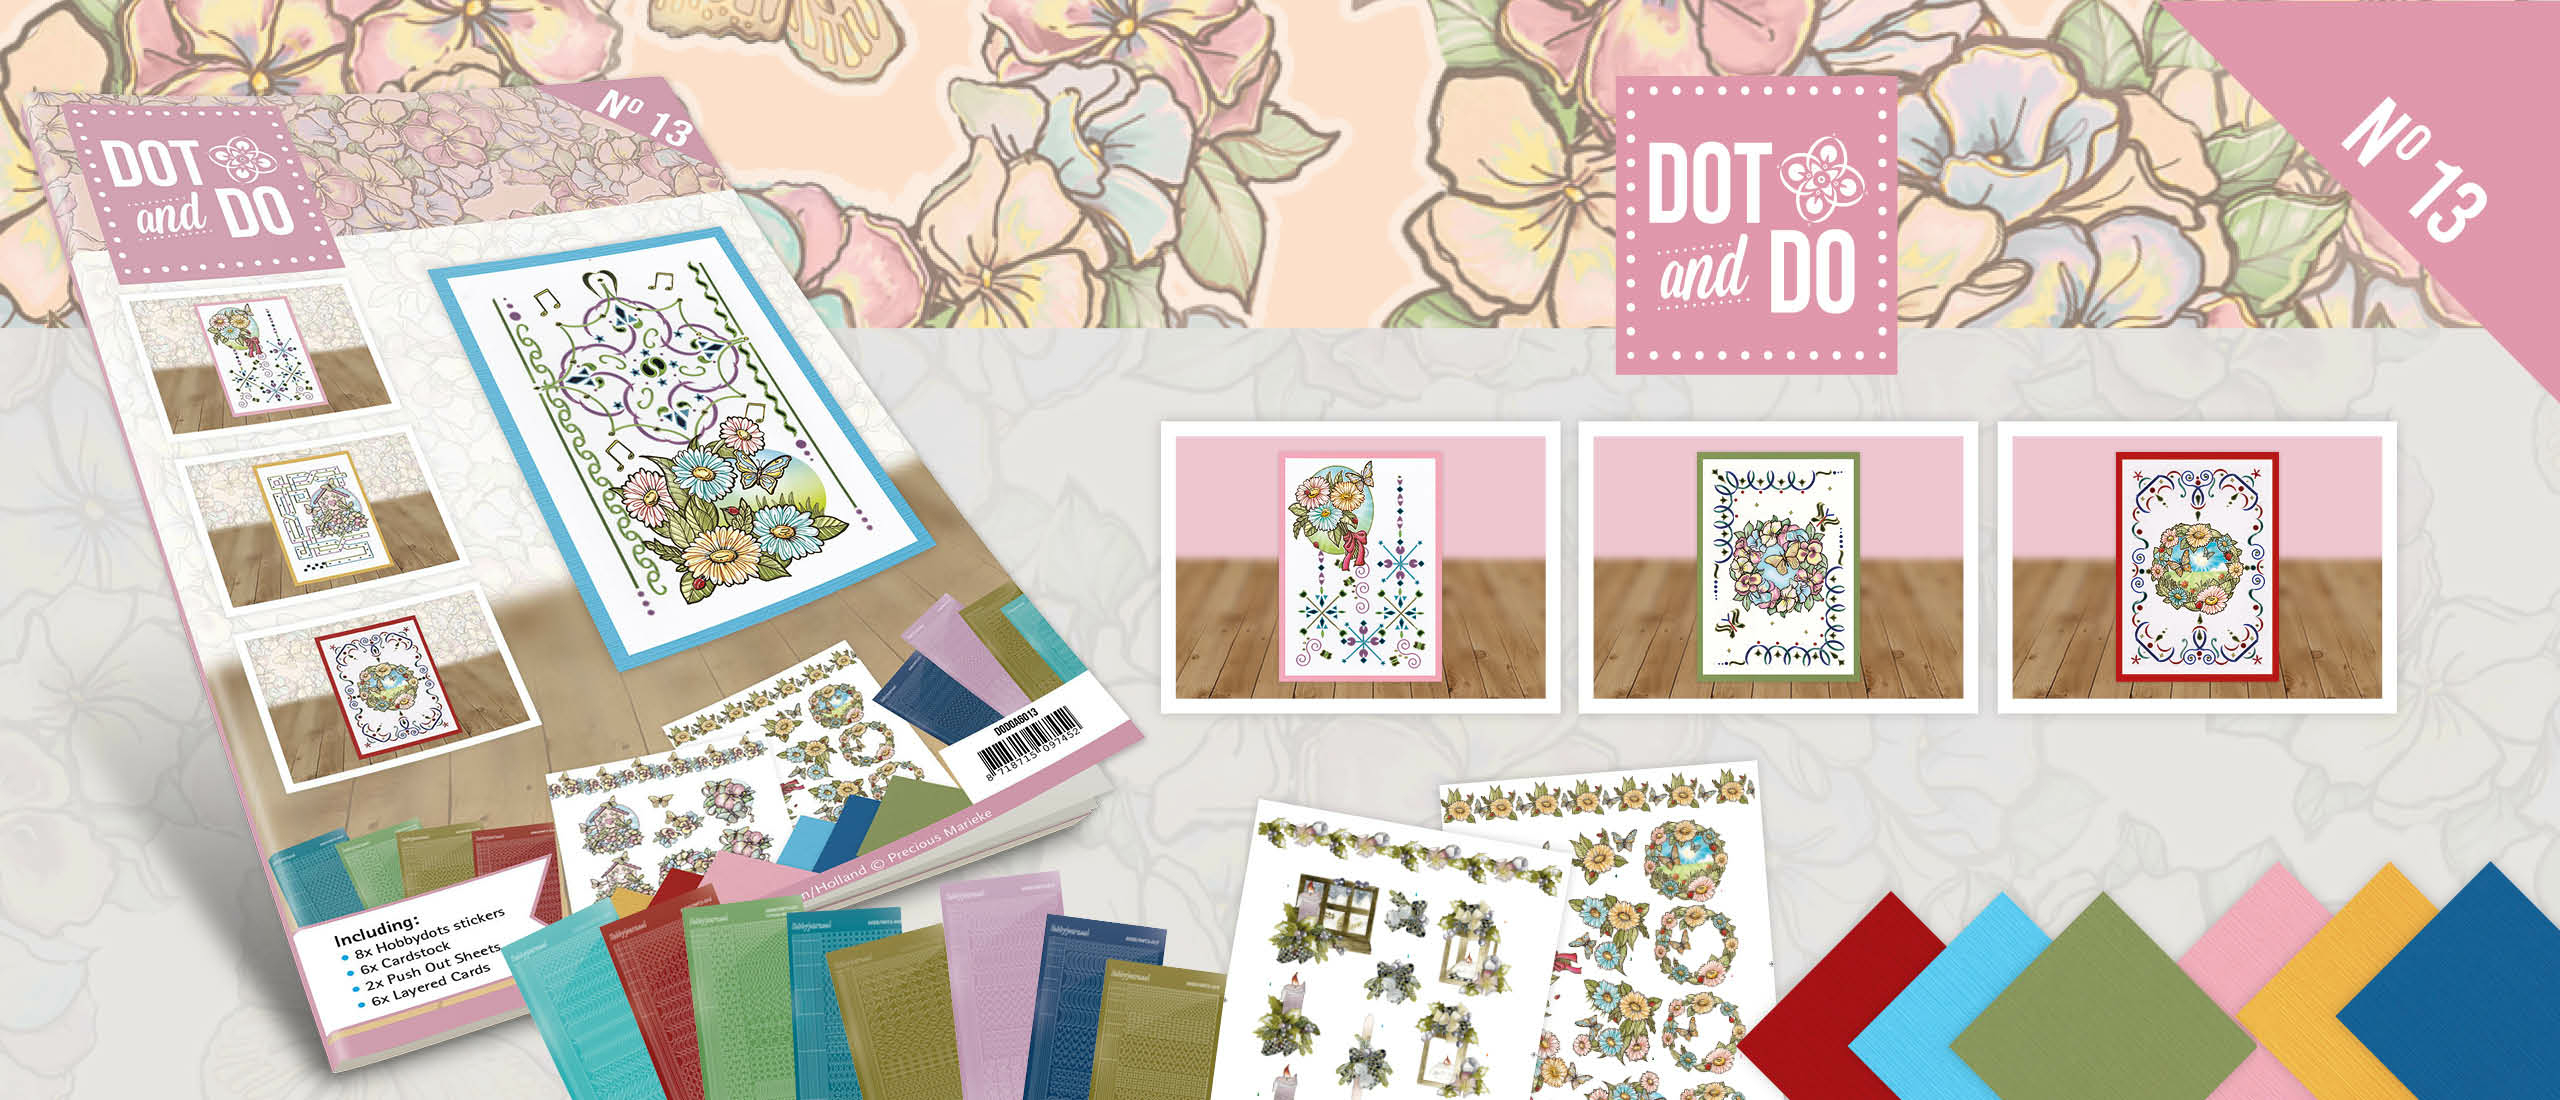 Dot and Do Book 13 - Yvonne Creations - Flowers